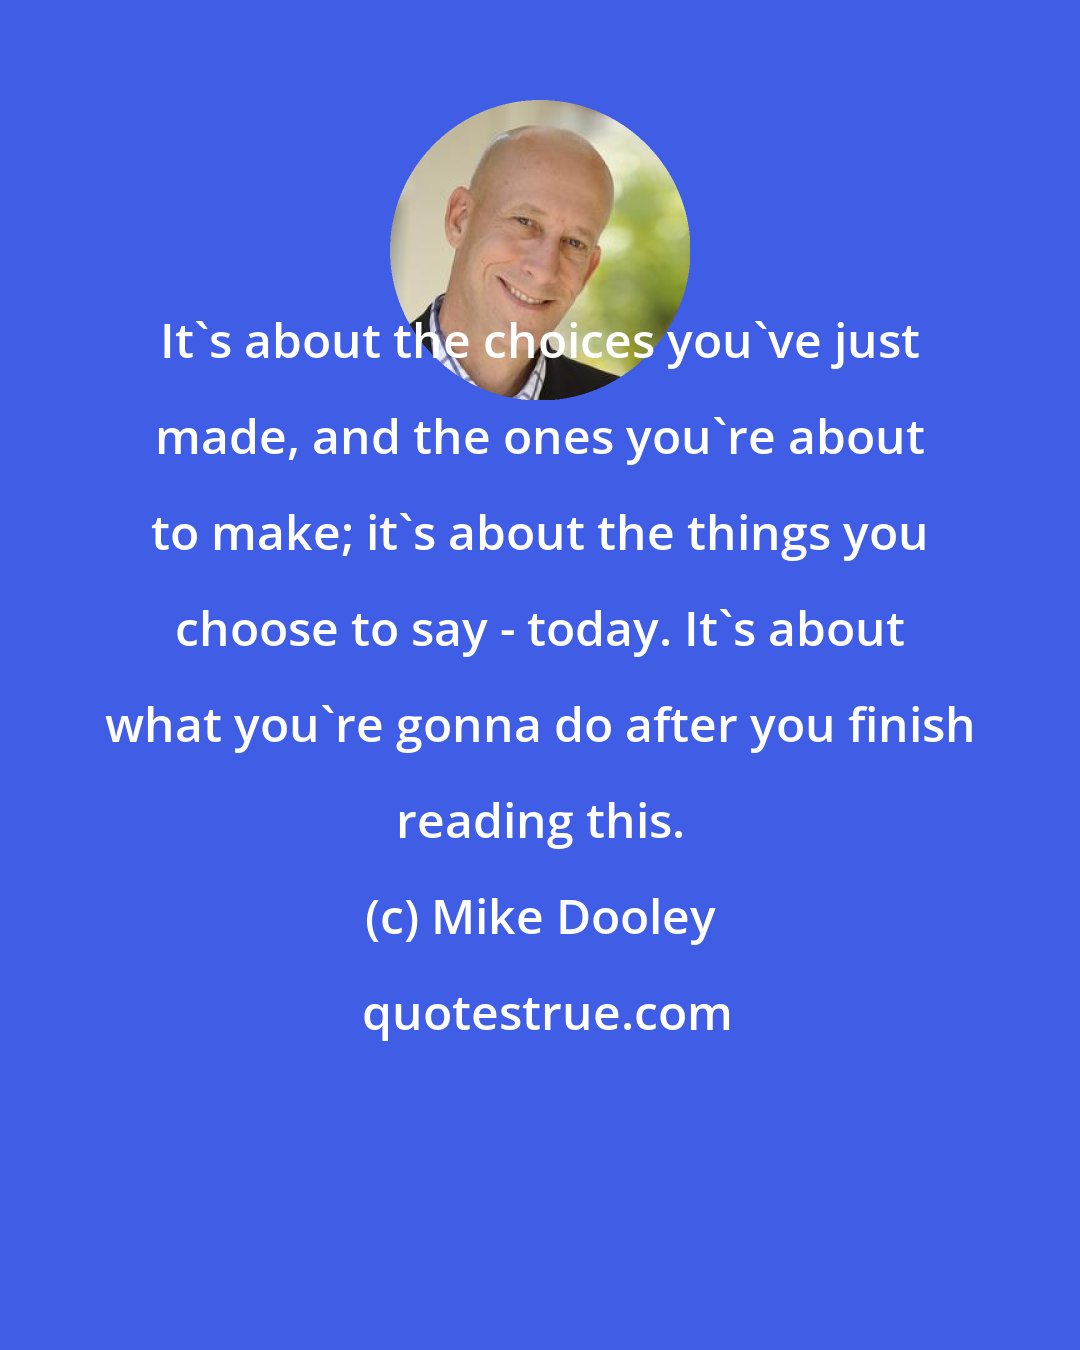 Mike Dooley: It's about the choices you've just made, and the ones you're about to make; it's about the things you choose to say - today. It's about what you're gonna do after you finish reading this.